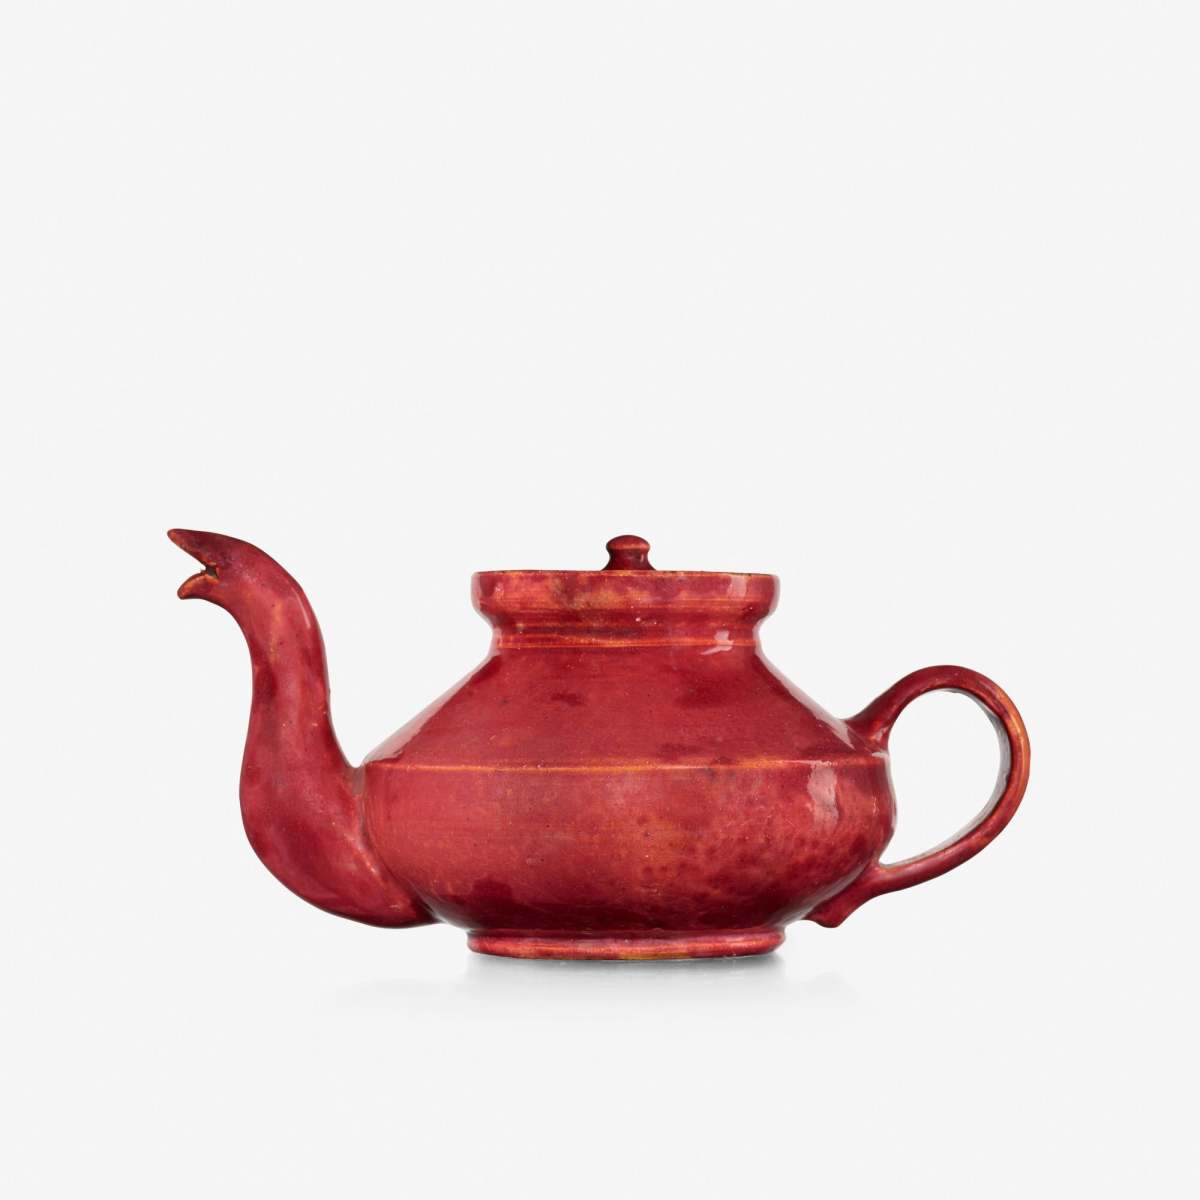 Teapot with snake spout, 1895-96, features a raspberry glaze, 3-1/2” h × 7 w × 4-1/2” d; sold at Rago for $10,000.